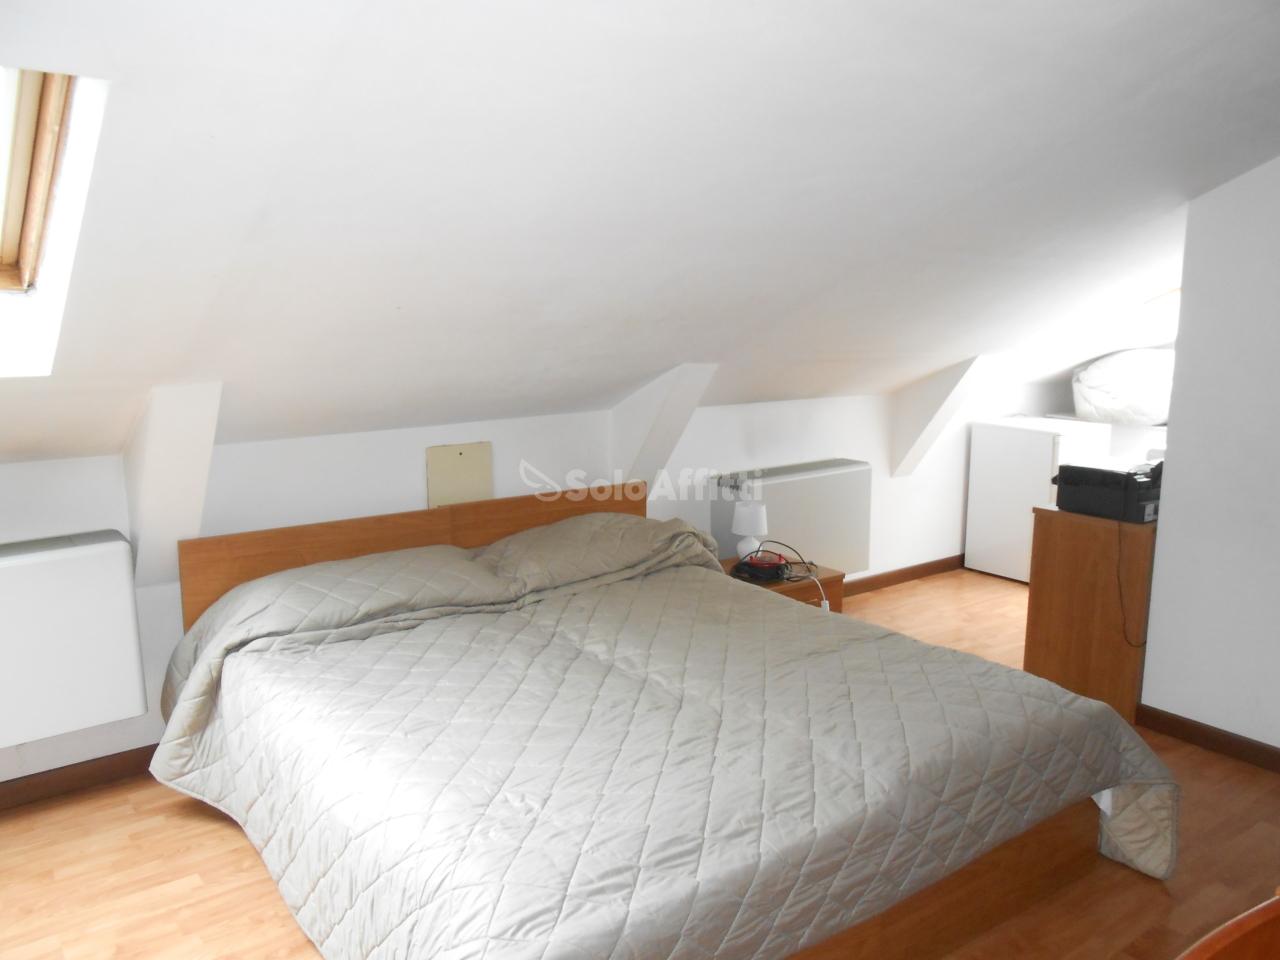 Rent Roomed, Pavia foto